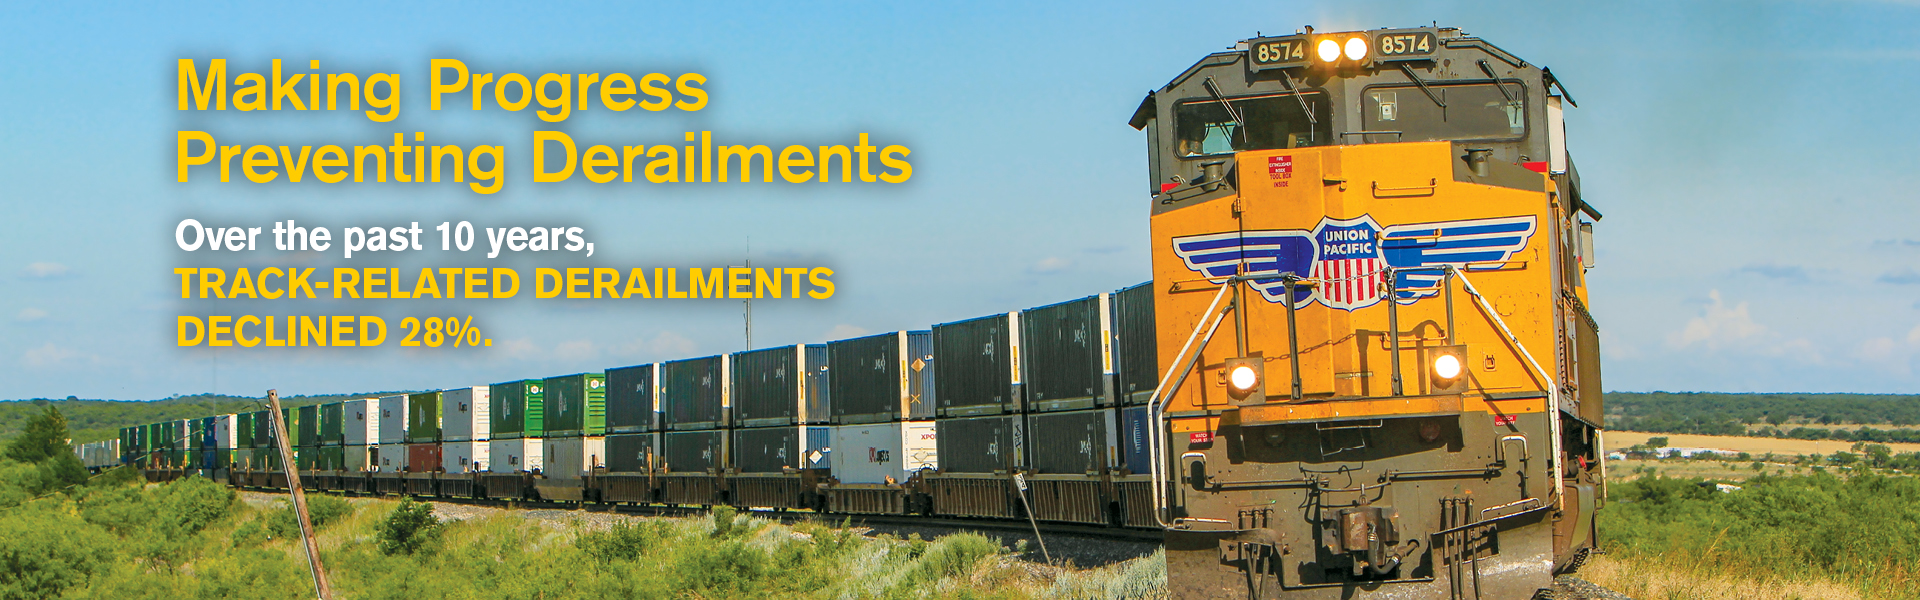 Over the past 10 years, track-related derailments declined 28%.